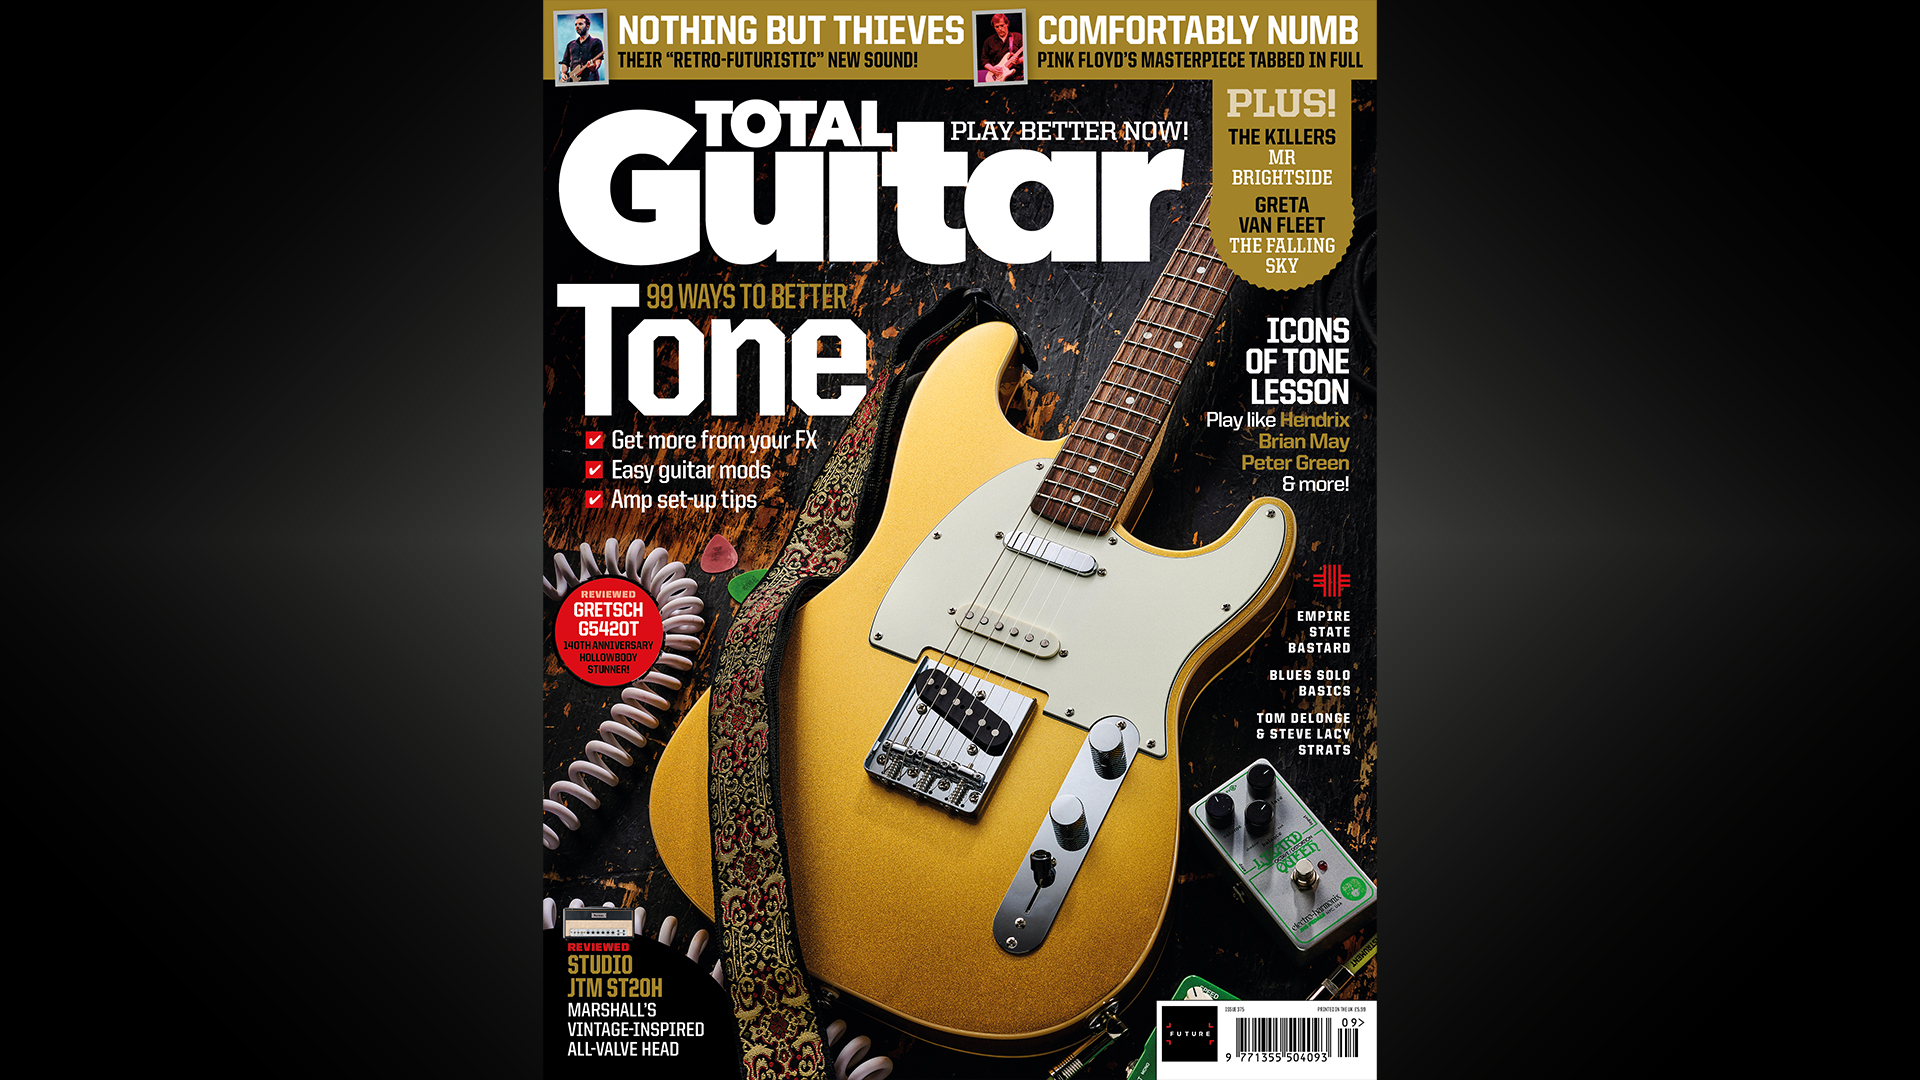 Download and stream the audio from Total Guitar 375